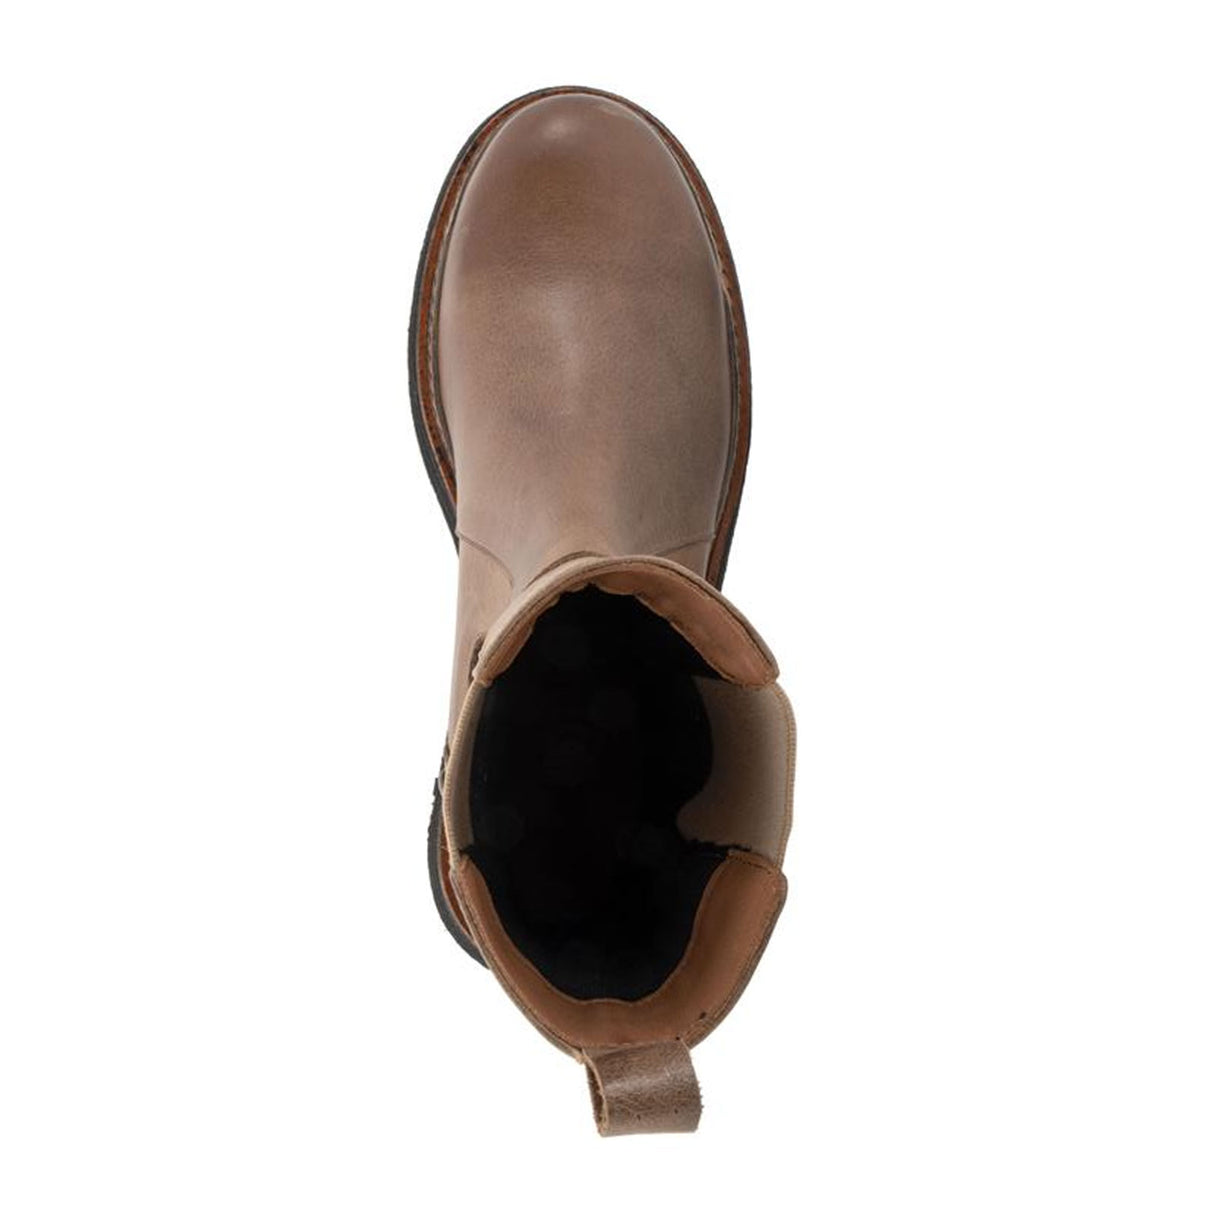 Bueno Gizelle Mid Chelsea Boot (Women) - Taupe Boots - Fashion - Chelsea - The Heel Shoe Fitters